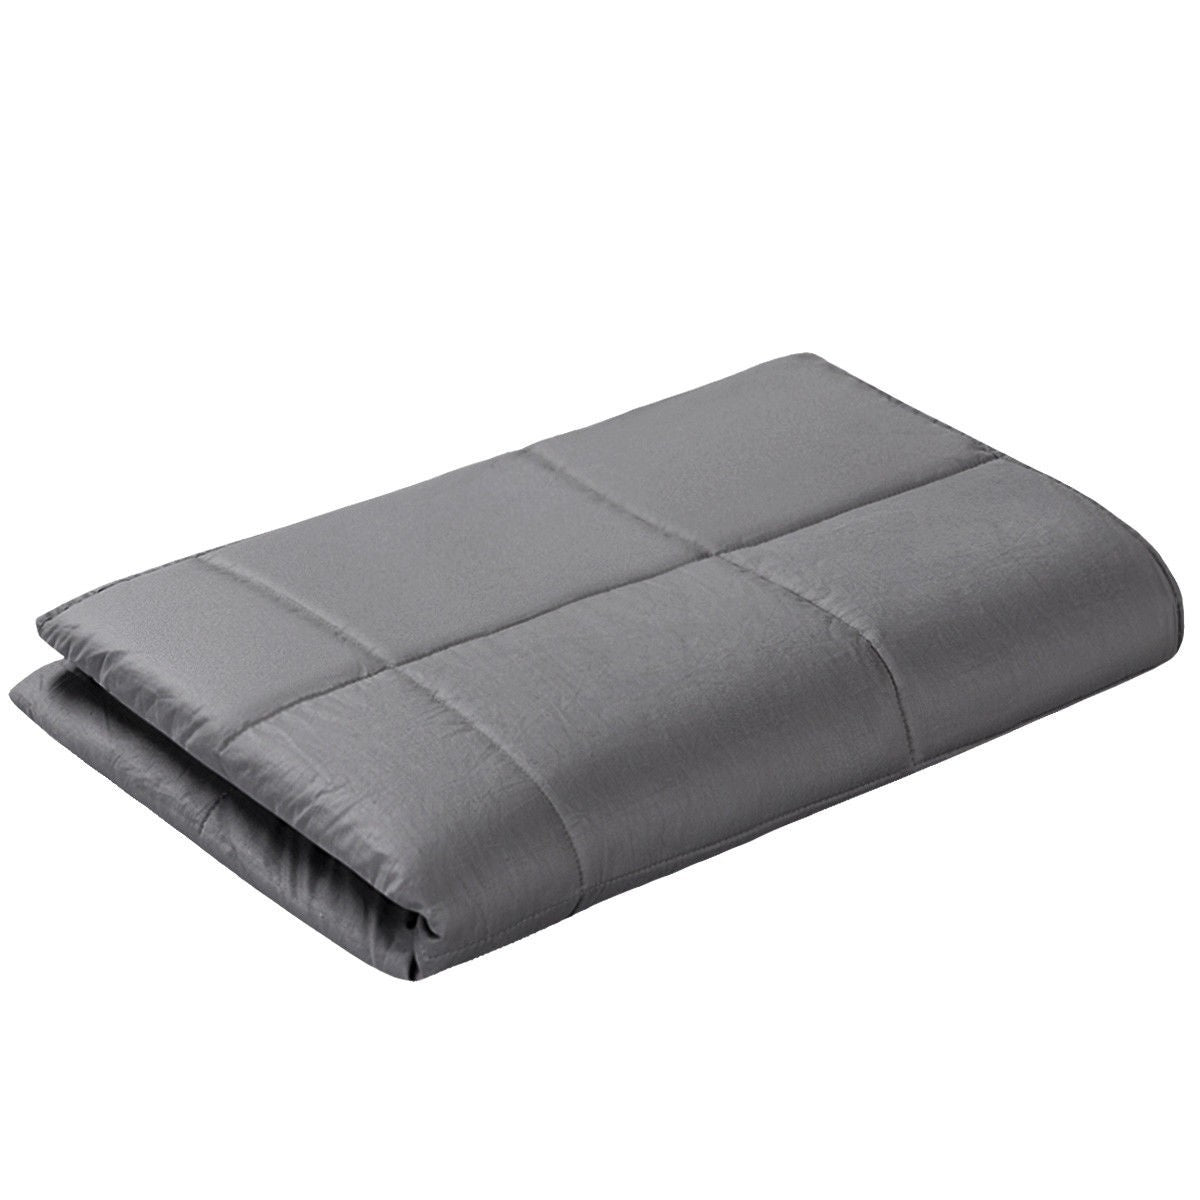 Giantex Weighted Blanket 12lbs-17lbs Twin/Queen Size, Premium 200TC 100% Cotton